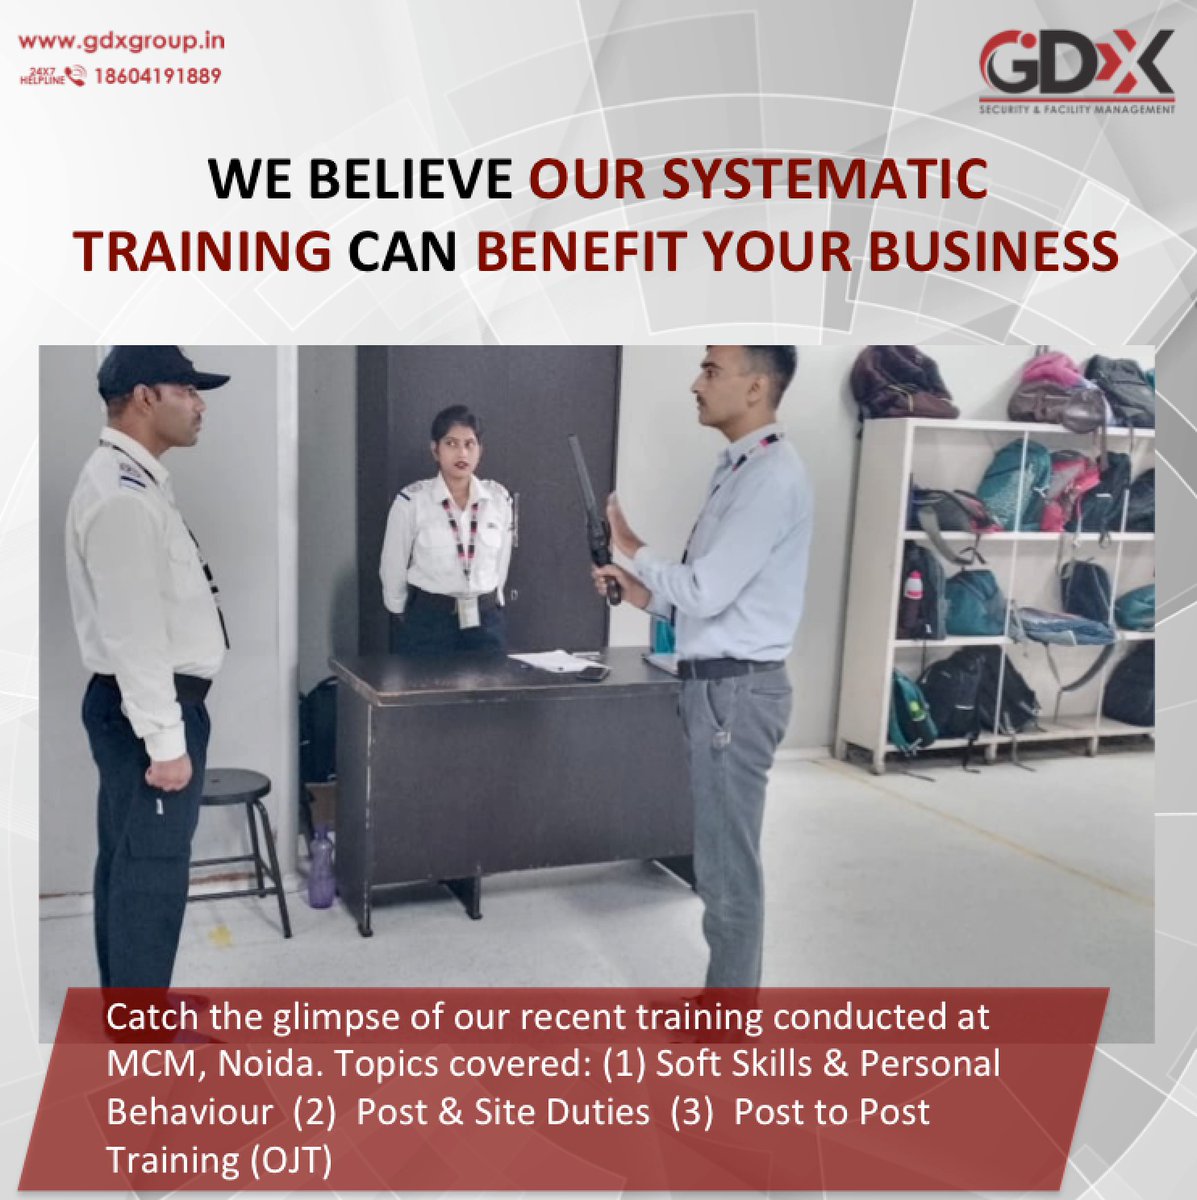 We believe our systematic #Training can benefit your business.
We at #GDXGroup train our staff regularly to keep your business safe. #GDXtraining